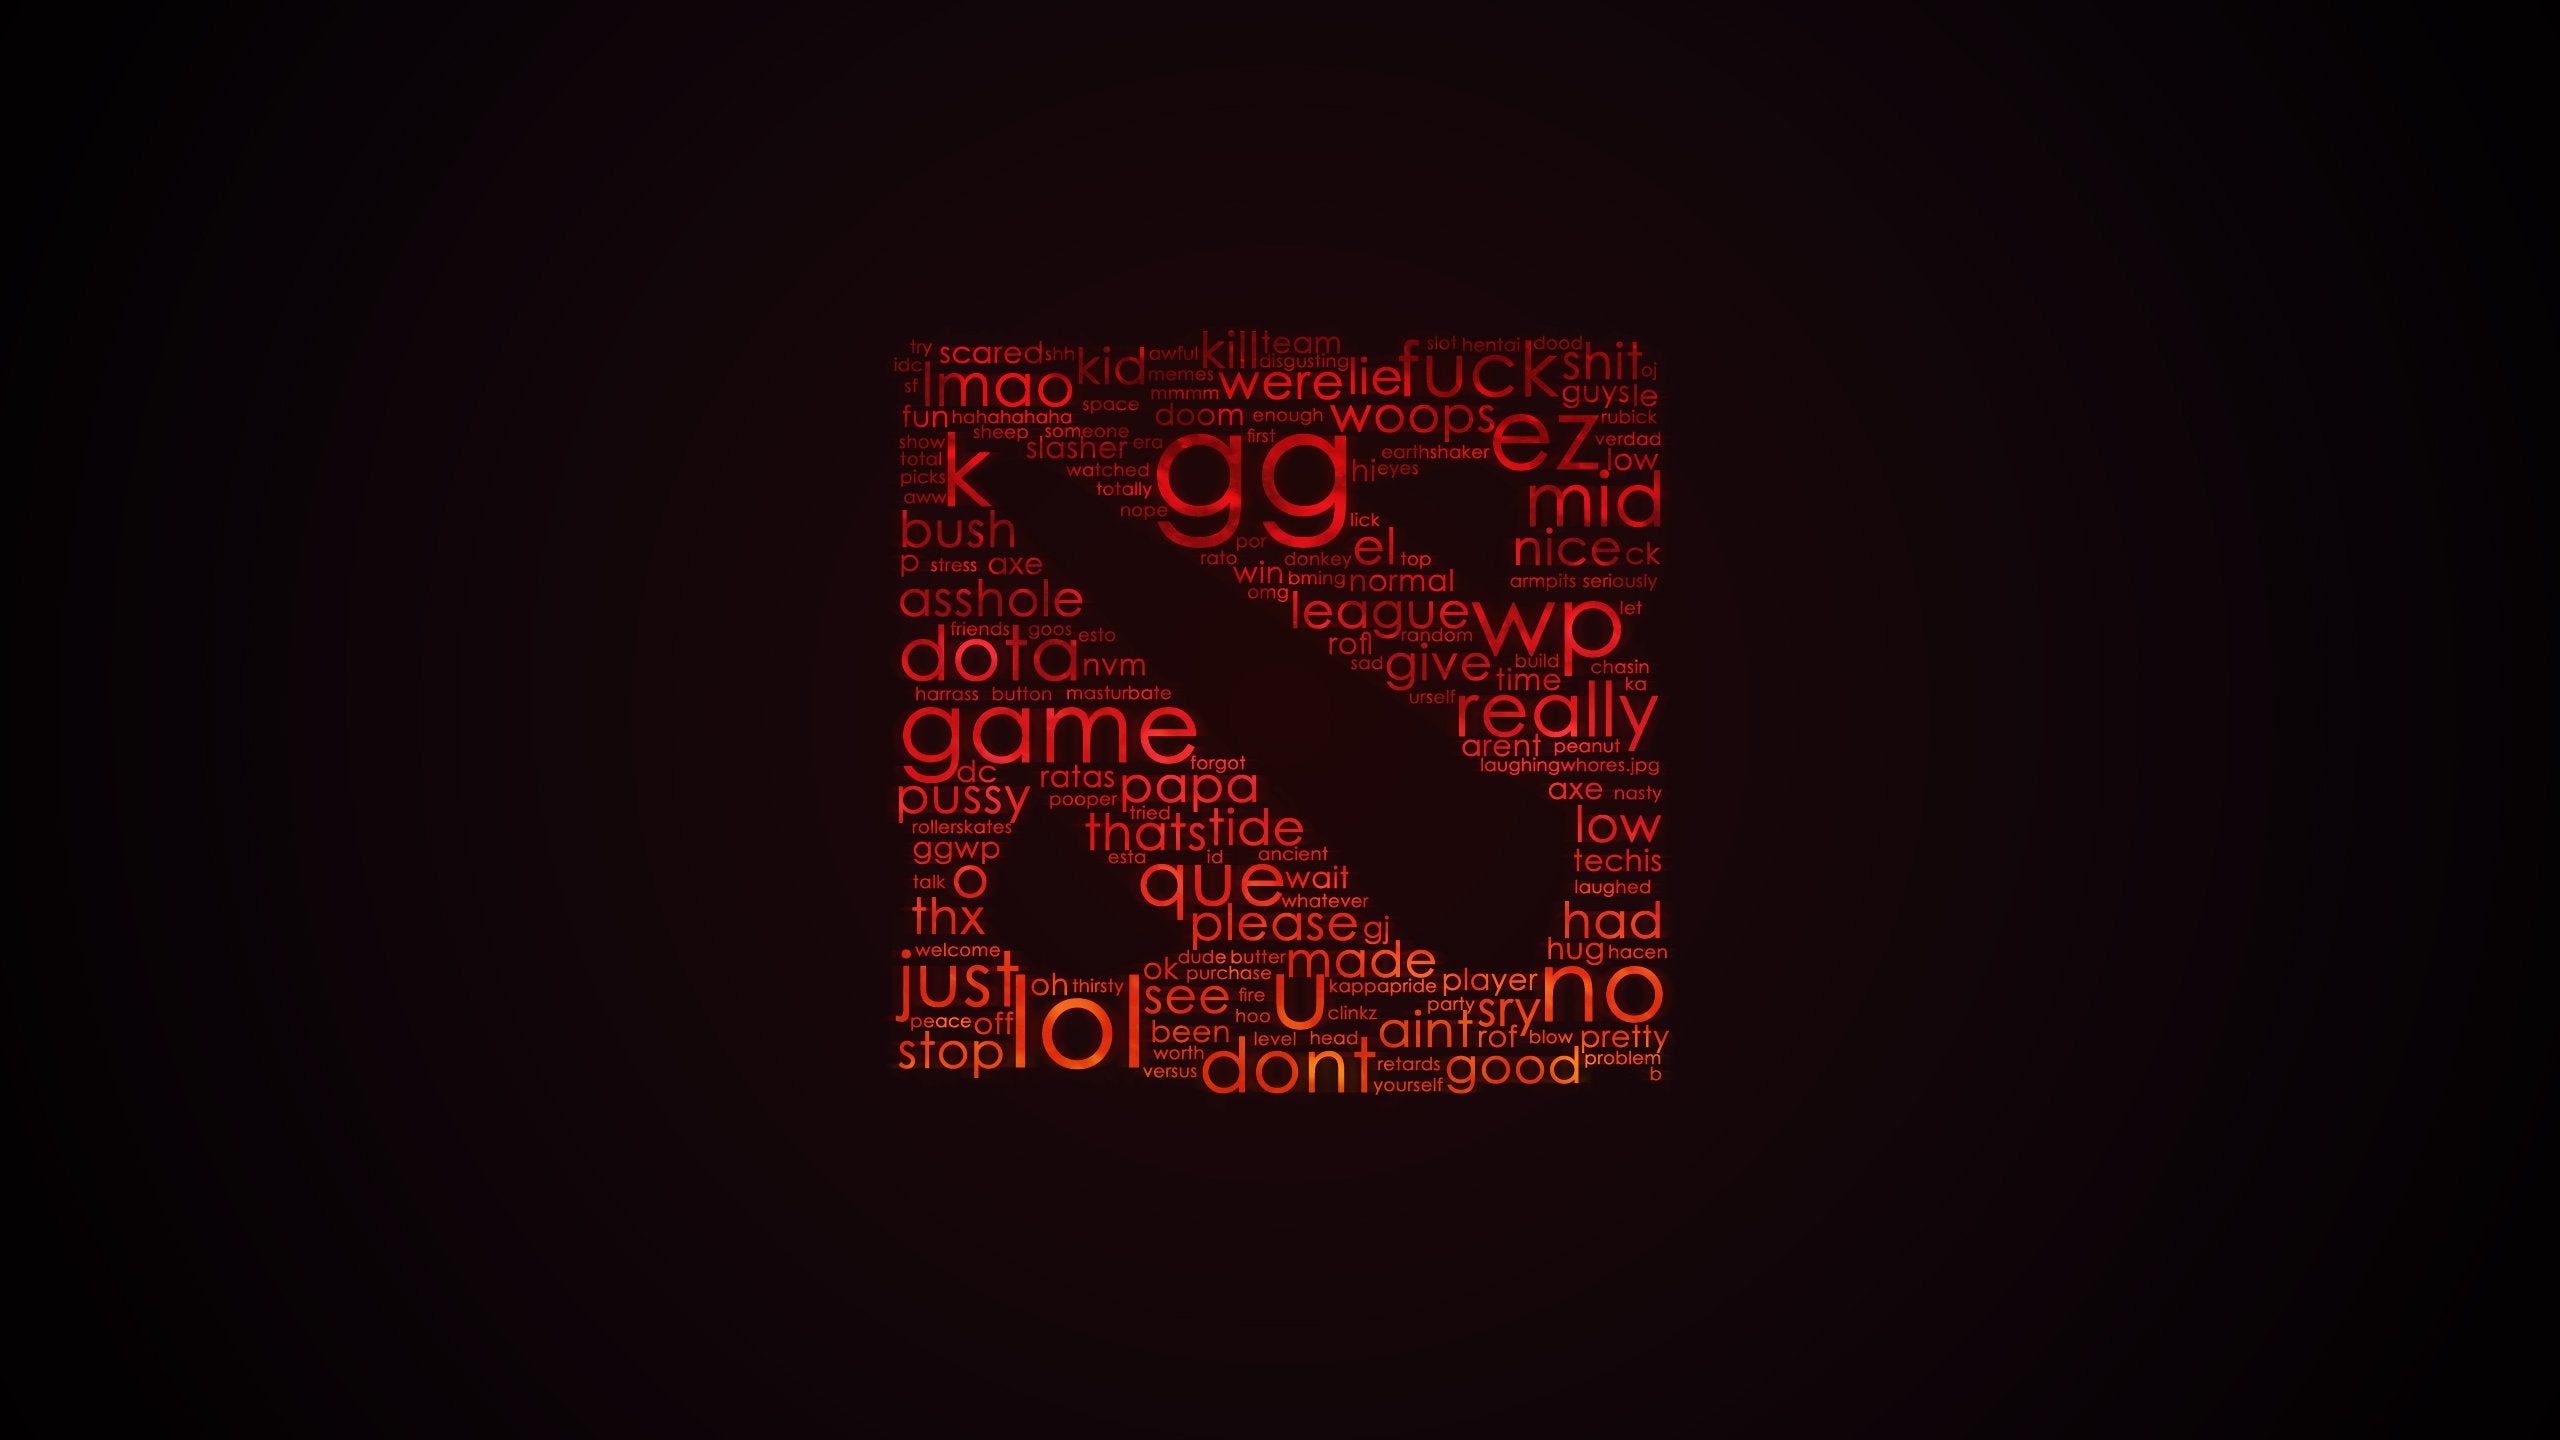 Dota 2 logo made from all chat word cloud